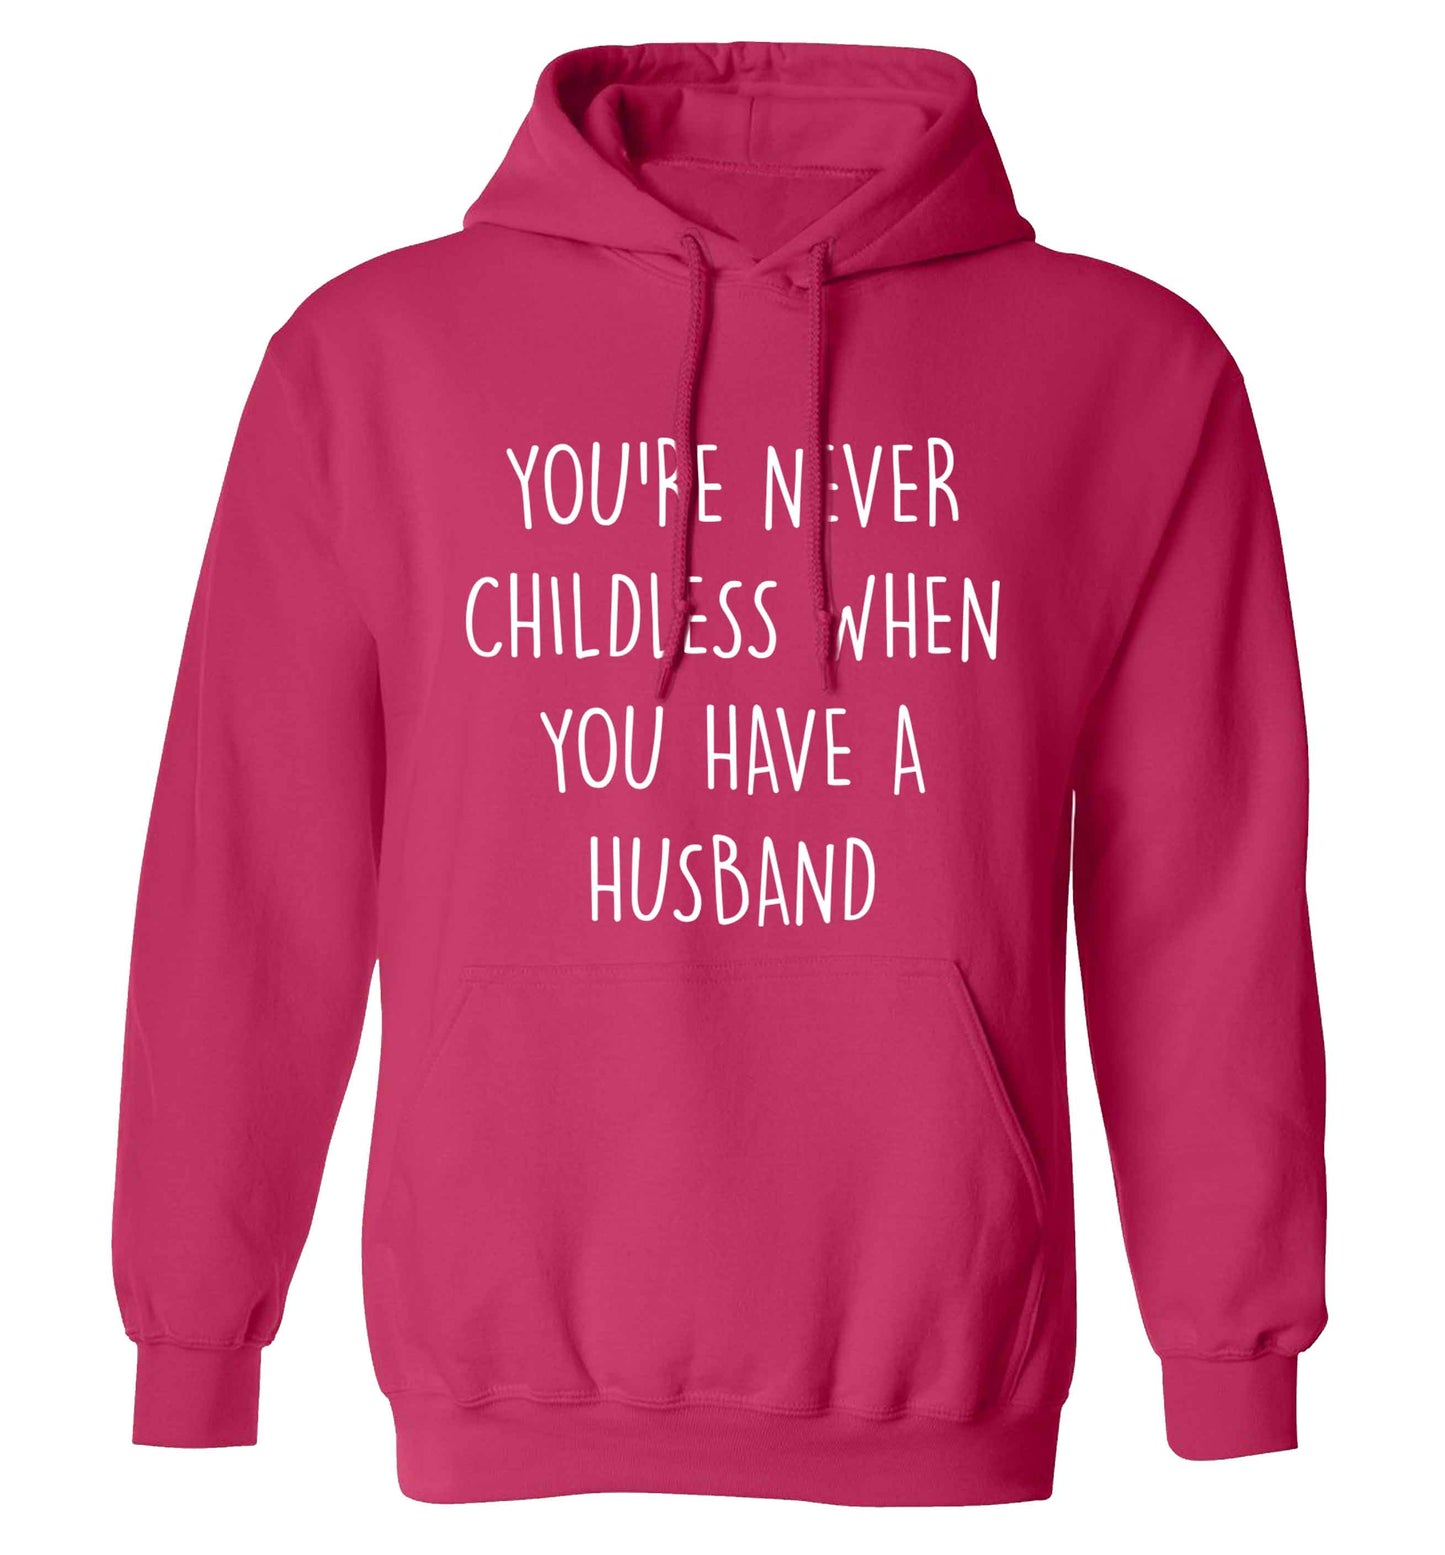 You're never childess when you have a husband adults unisex pink hoodie 2XL